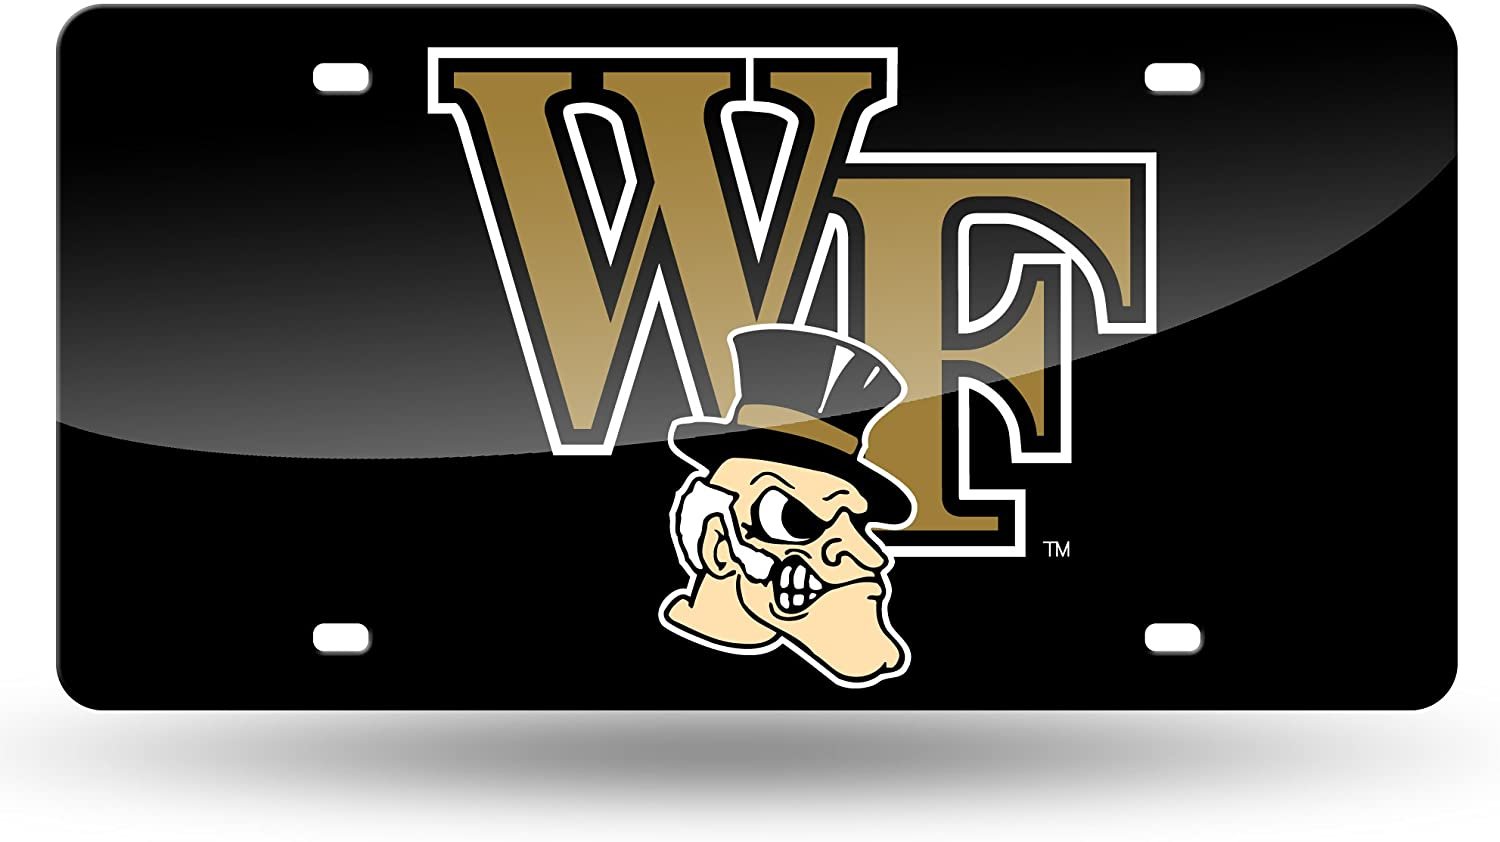 Wake Forest University Demon Deacons Premium Laser Cut Tag License Plate, Black, Mirrored Acrylic Inlaid, 12x6 Inch